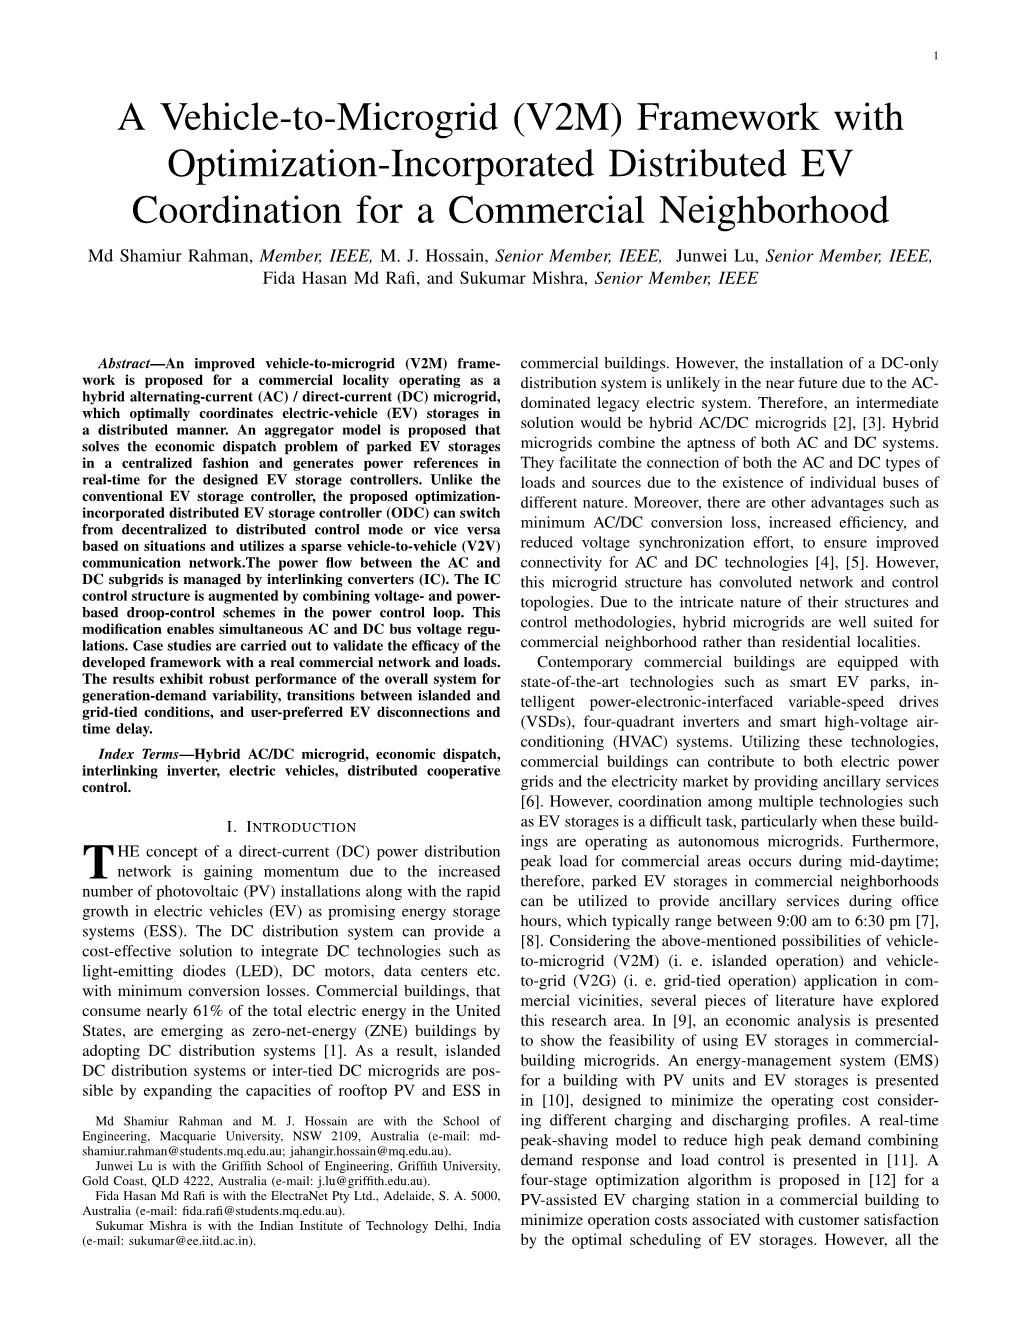 A Vehicle-To-Microgrid (V2M) Framework with Optimization-Incorporated Distributed EV Coordination for a Commercial Neighborhood Md Shamiur Rahman, Member, IEEE, M